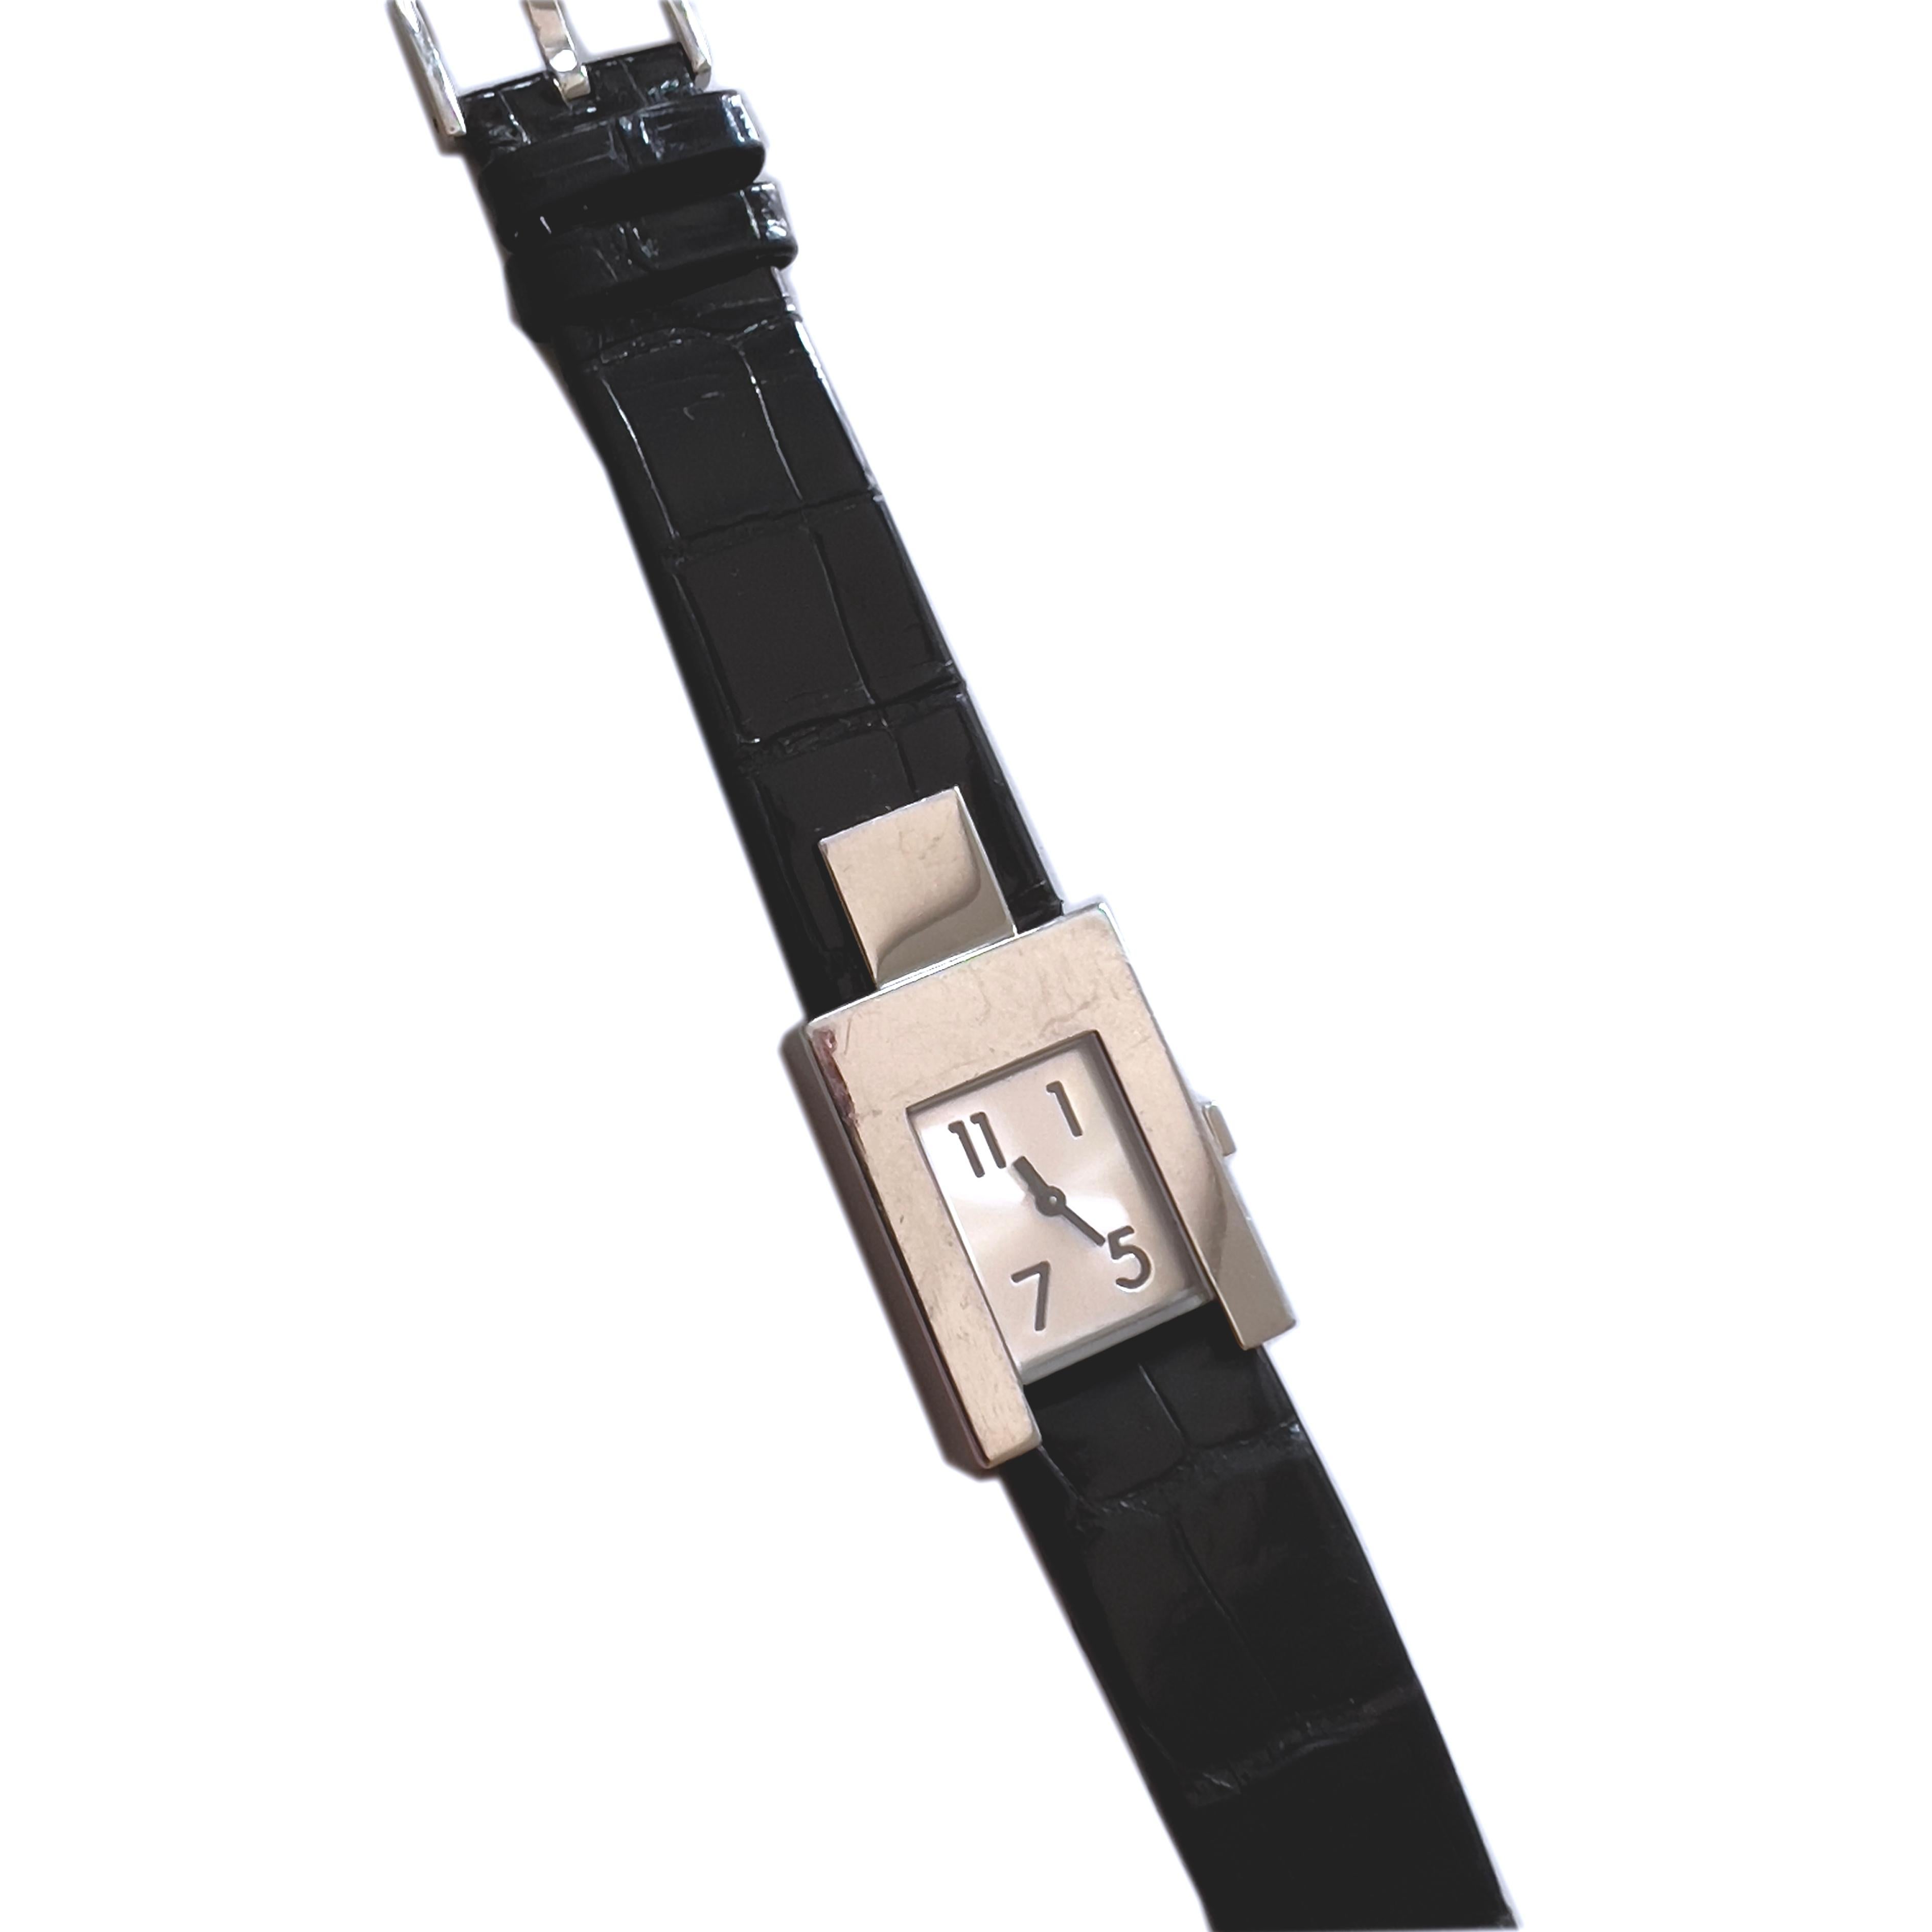 Original 1997 Iconic Pomellato Stainless Steel, Self- Winding Mechanical Movement Stress Watch, Black Leather Strap: a square plate creates an aesthetic link that connects  the watch to the fitted strap making this piece absolutely unique, chic yet